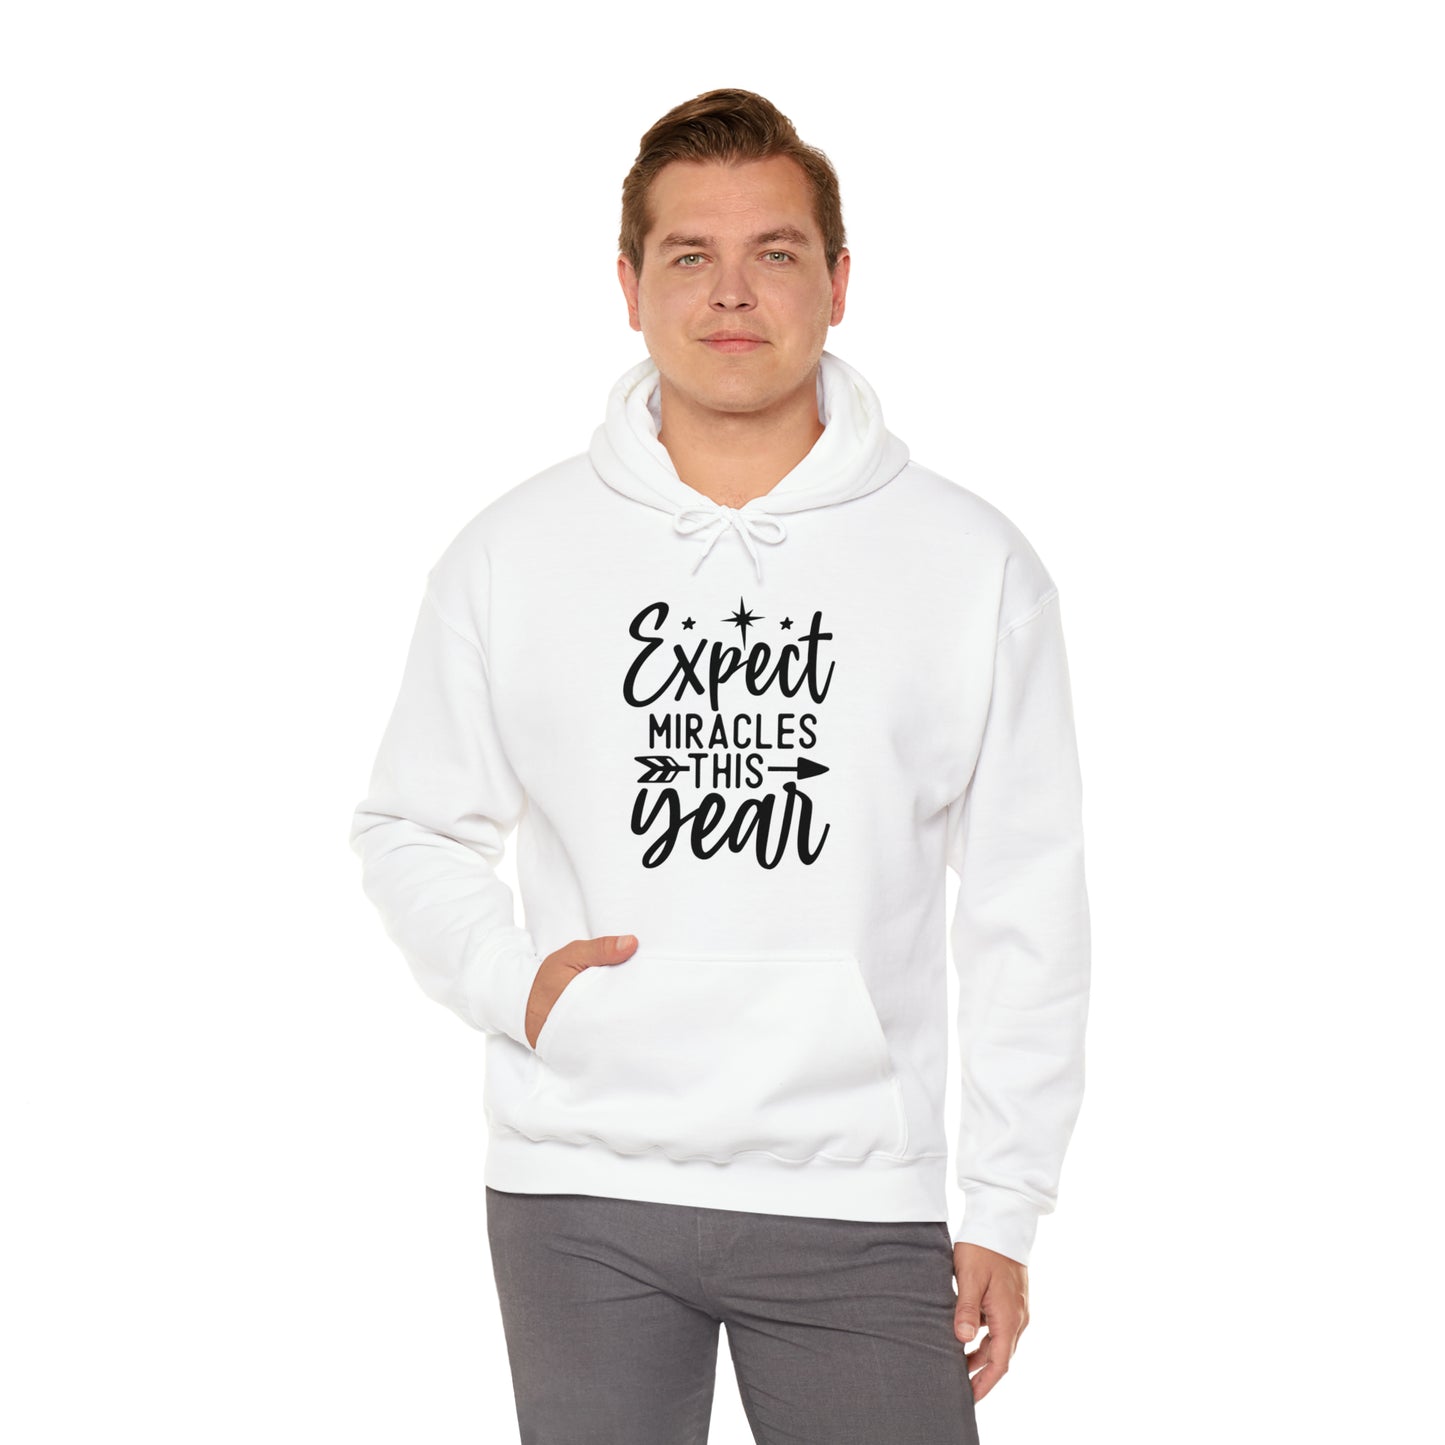 Expect Miracles Unisex Heavy Blend™ Hooded Sweatshirt